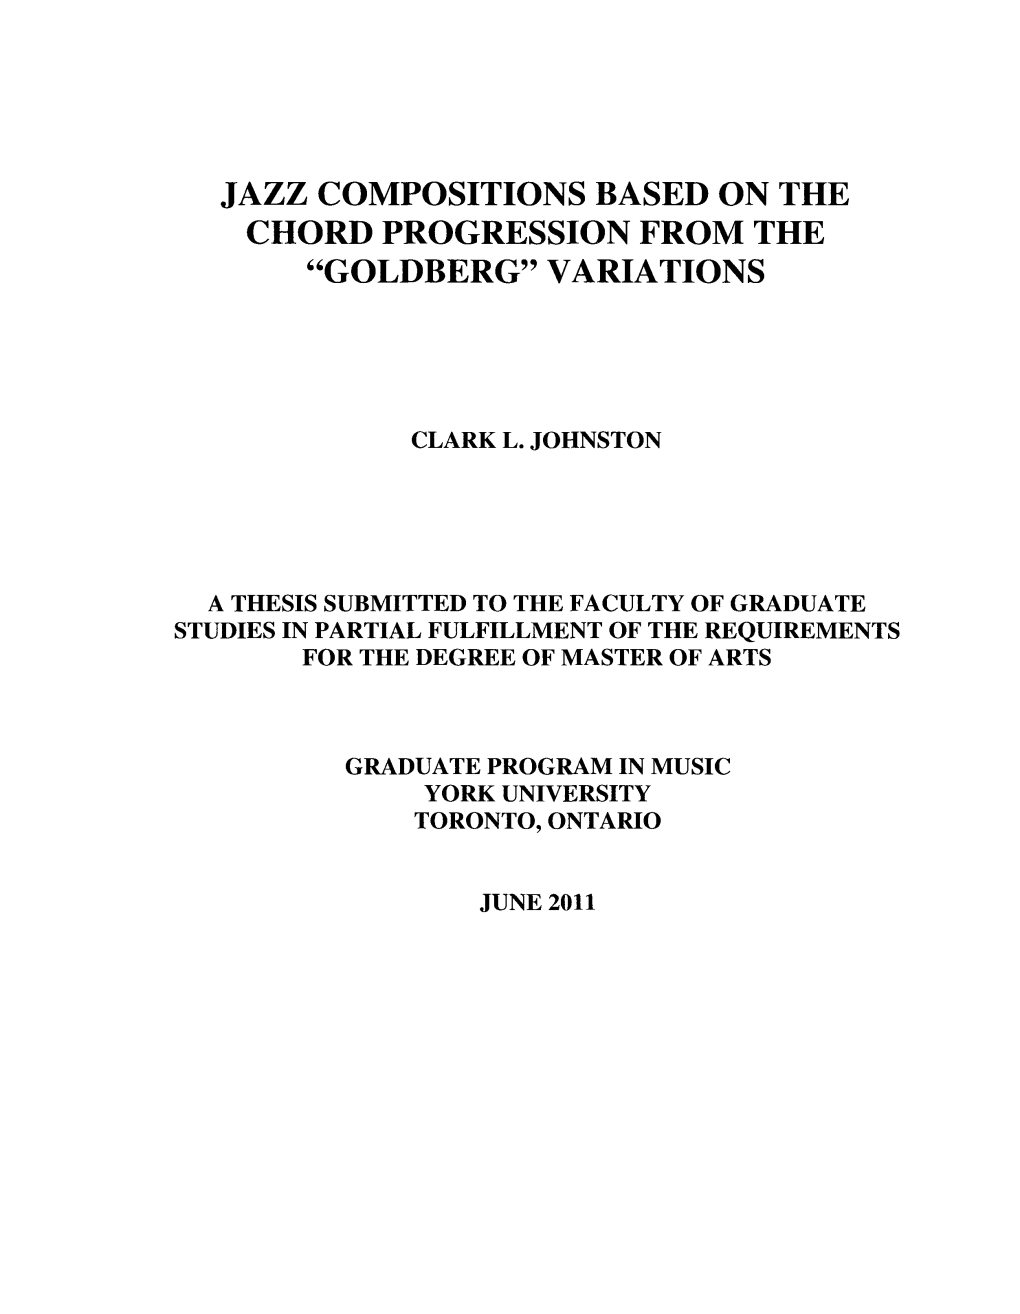 Jazz Compositions Based on the Chord Progression from the "Goldberg" Variations